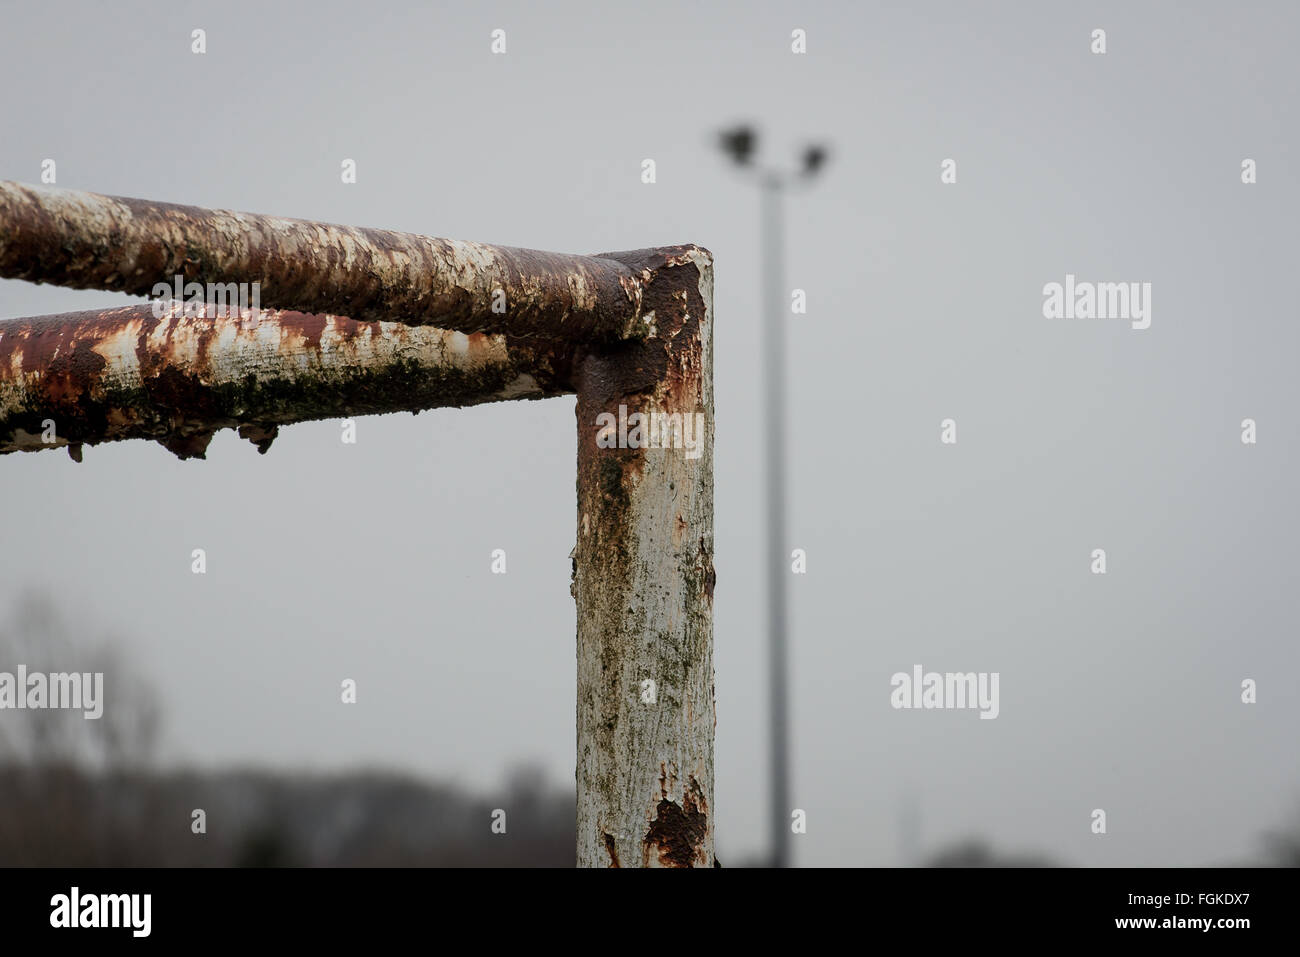 Deteriorated goalposts with out of focus floodlight Stock Photo